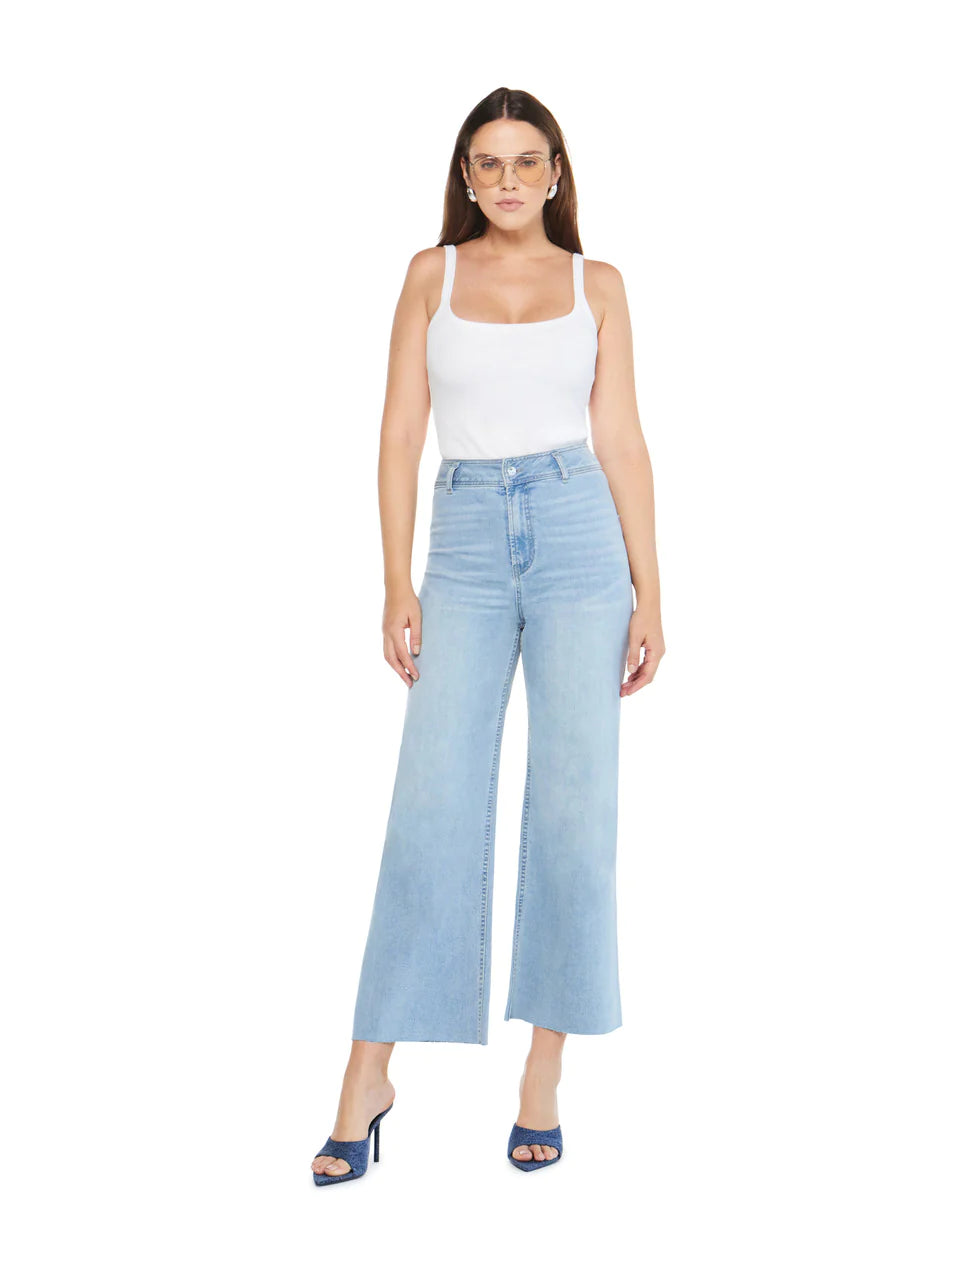 Articles of Society: Carine High Rise Relaxed Jean